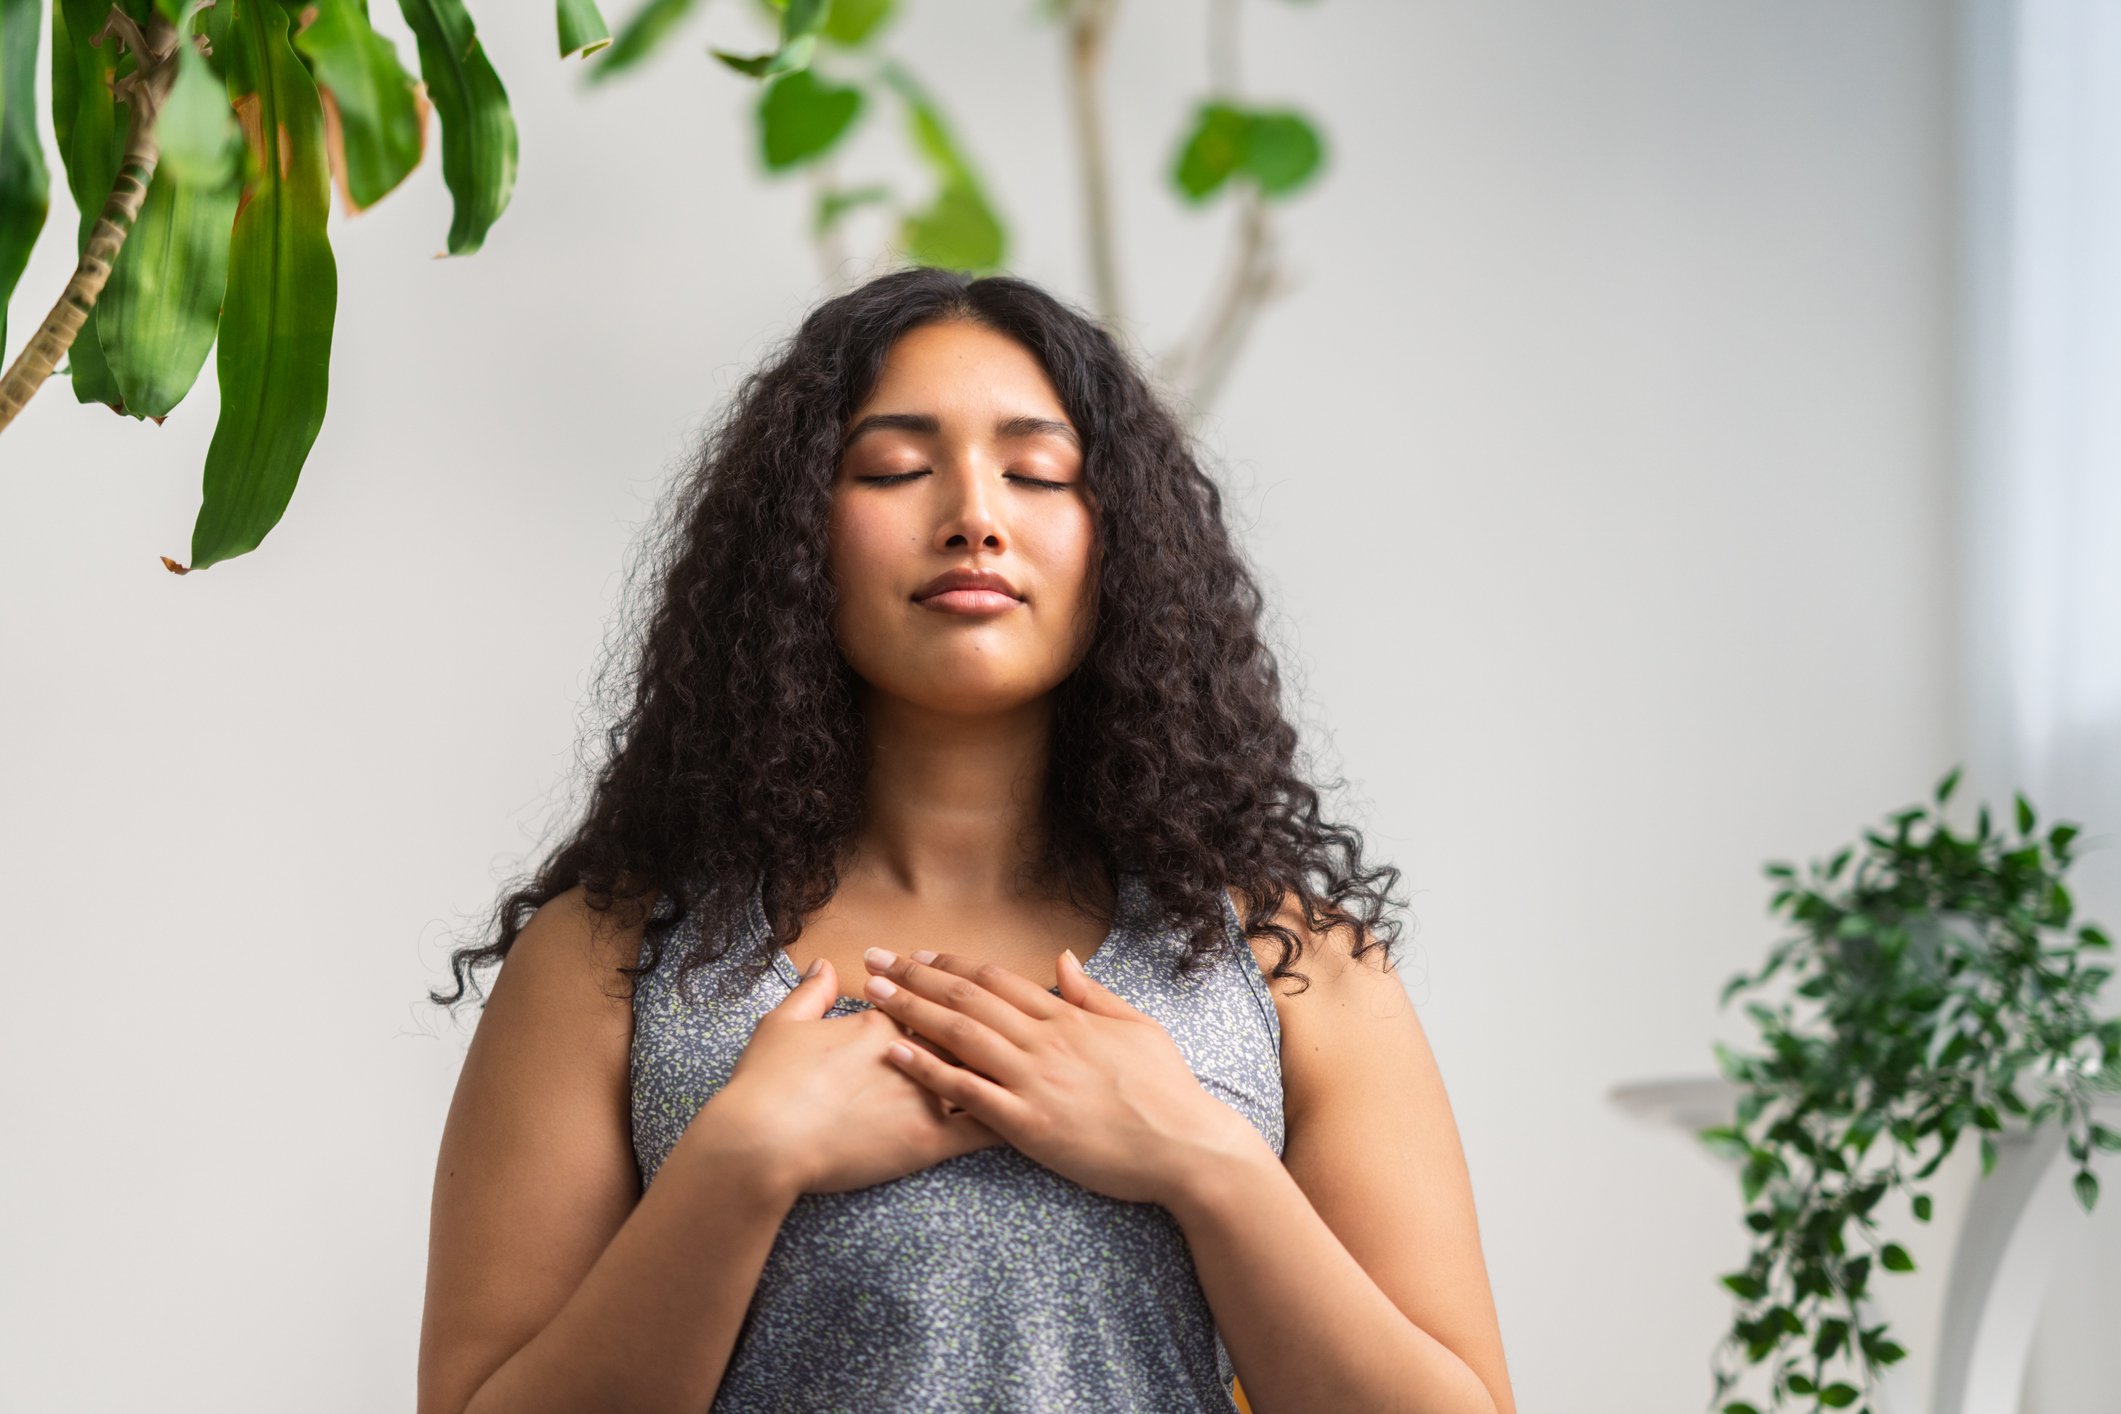 5 BEST Meditation For Stress Relief: Take a Stress Relief Break